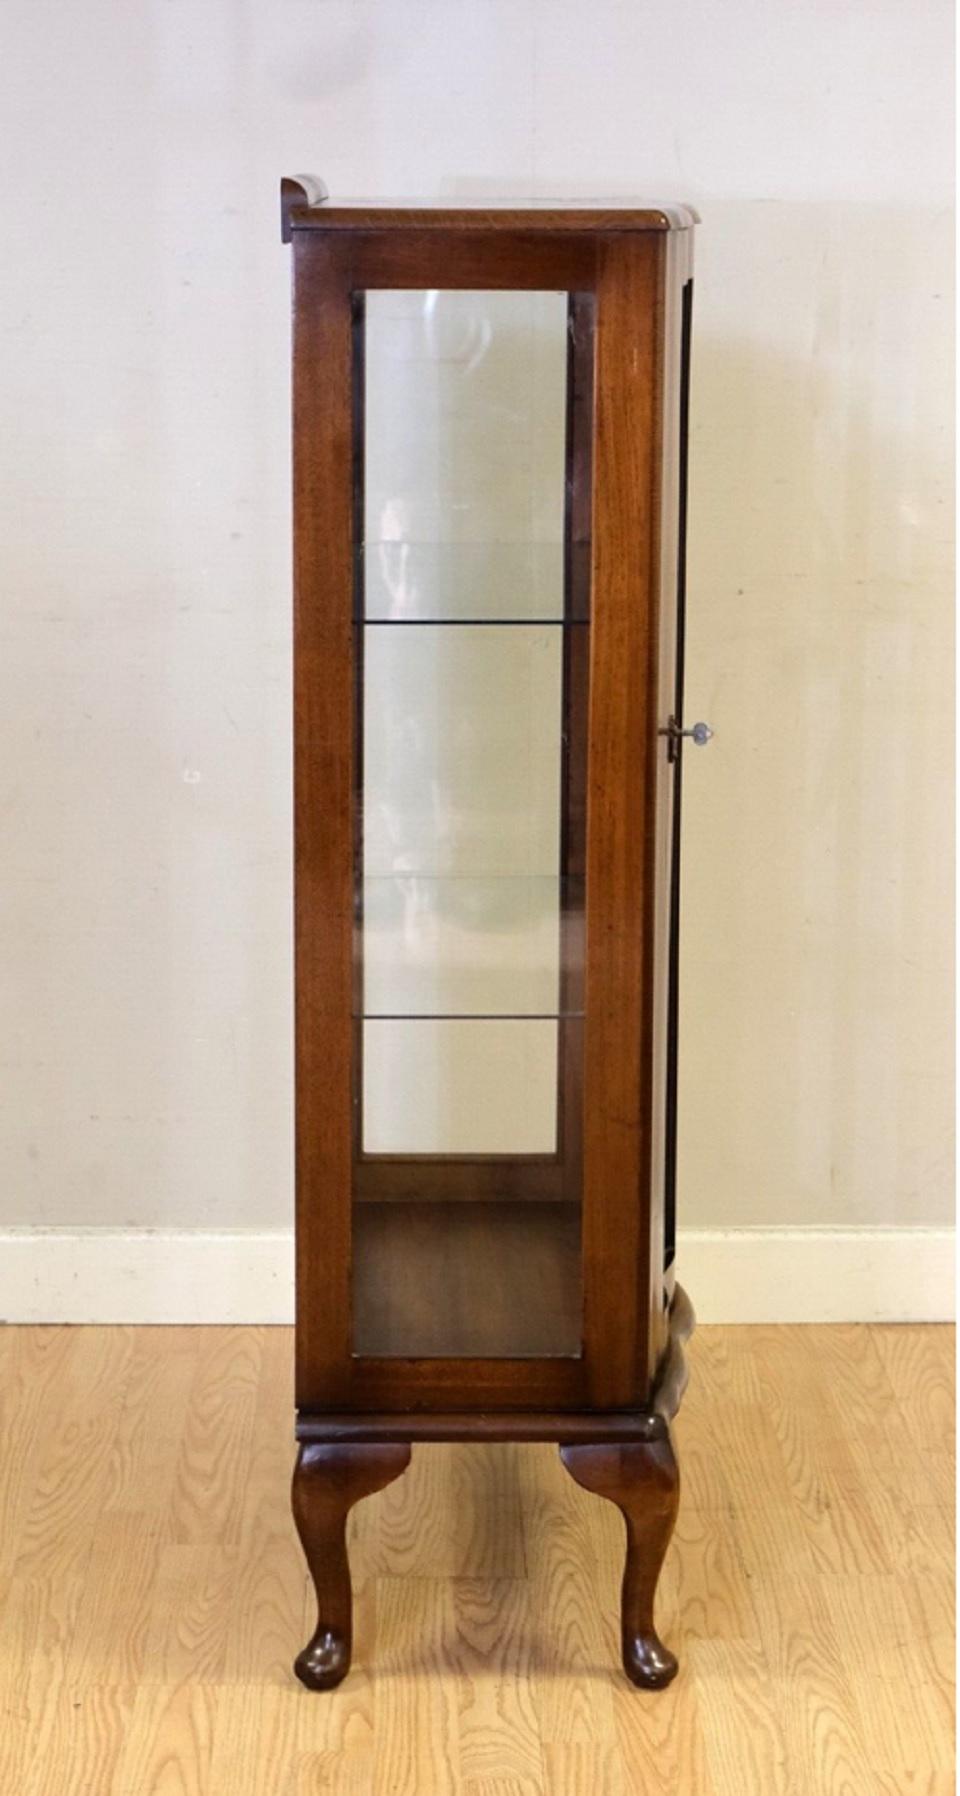 Hand-Crafted SMALL GORGEOUS WALNUT GLAZED BOOKCASE WiTH GLASS SHELVES ON QUEEN ANN STYLE LEGS For Sale